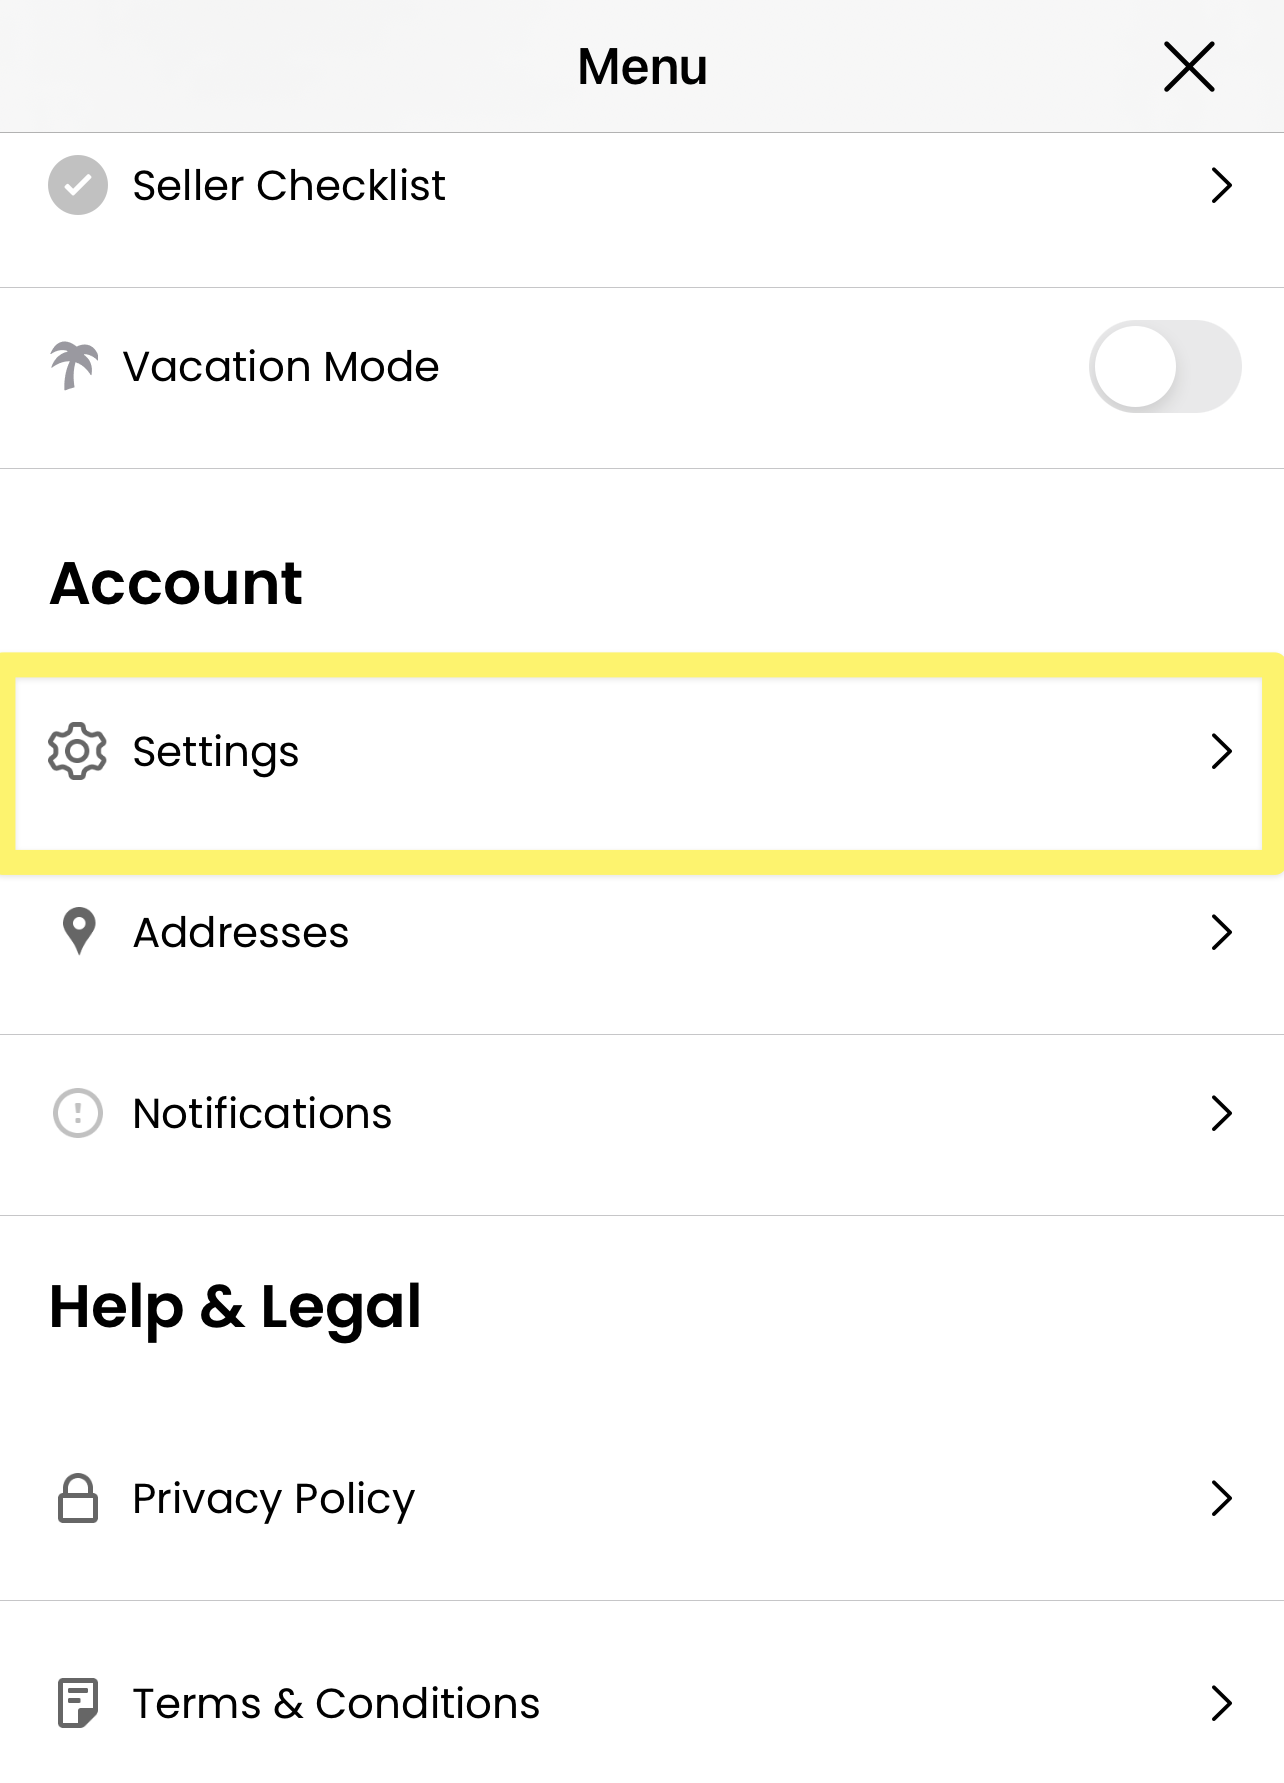 Settings_Option_From_Menu_on_Mobile.png